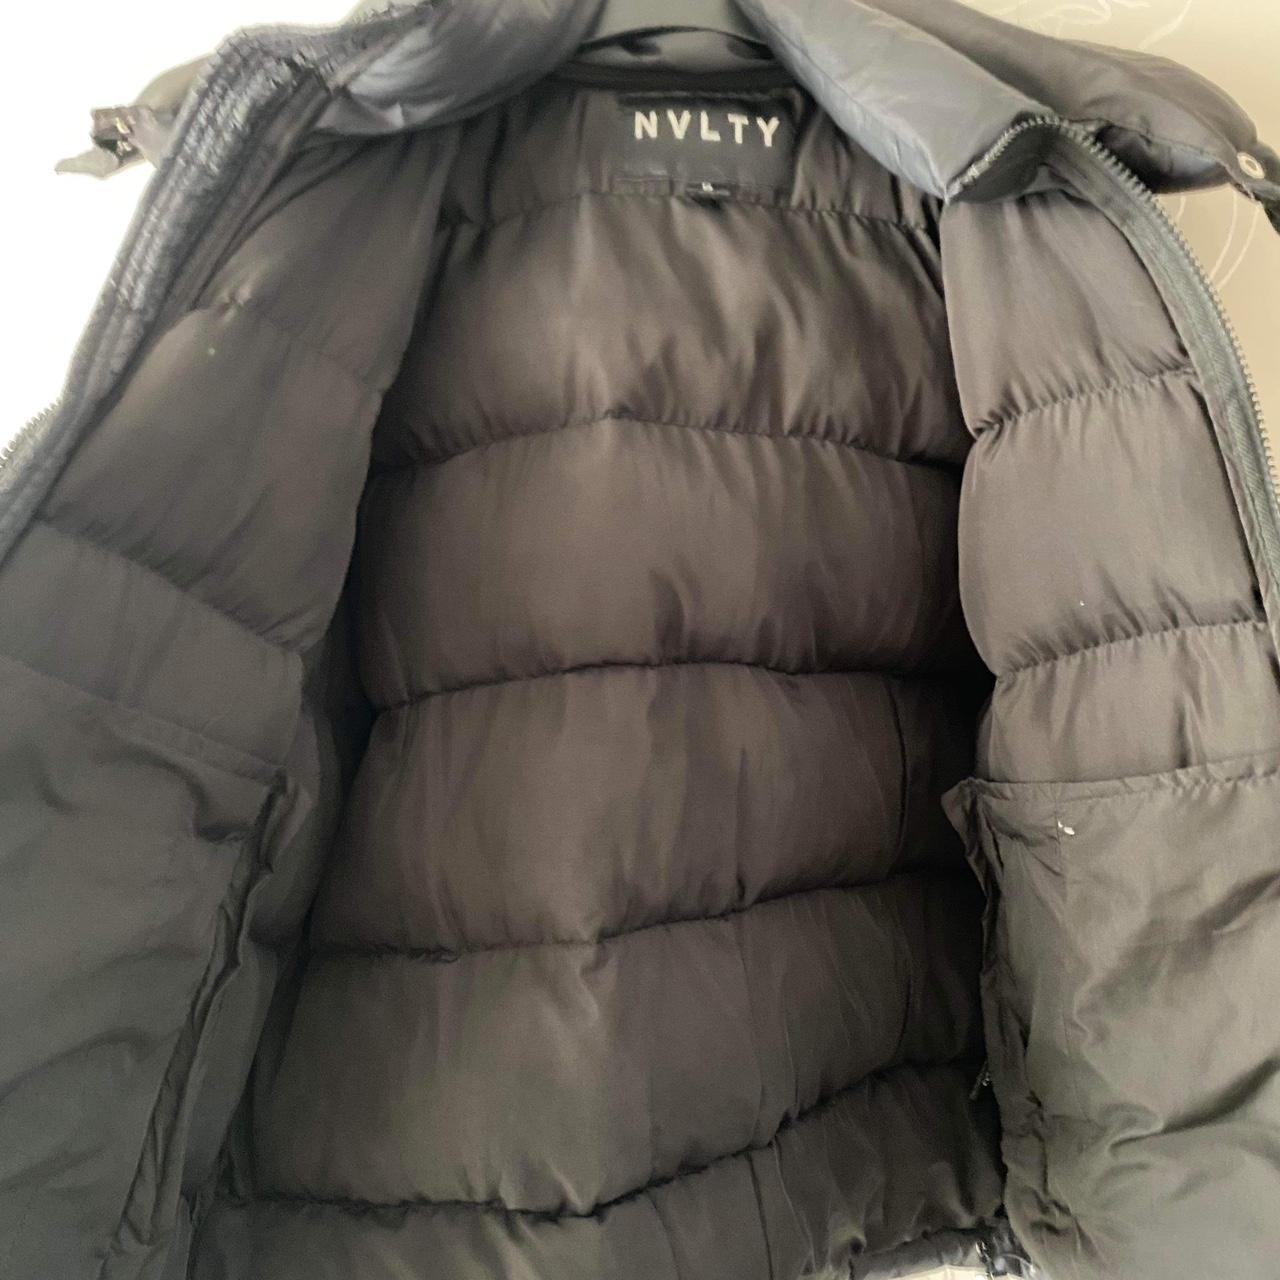 Black NVLTY puffer jacket, come with detachable... - Depop